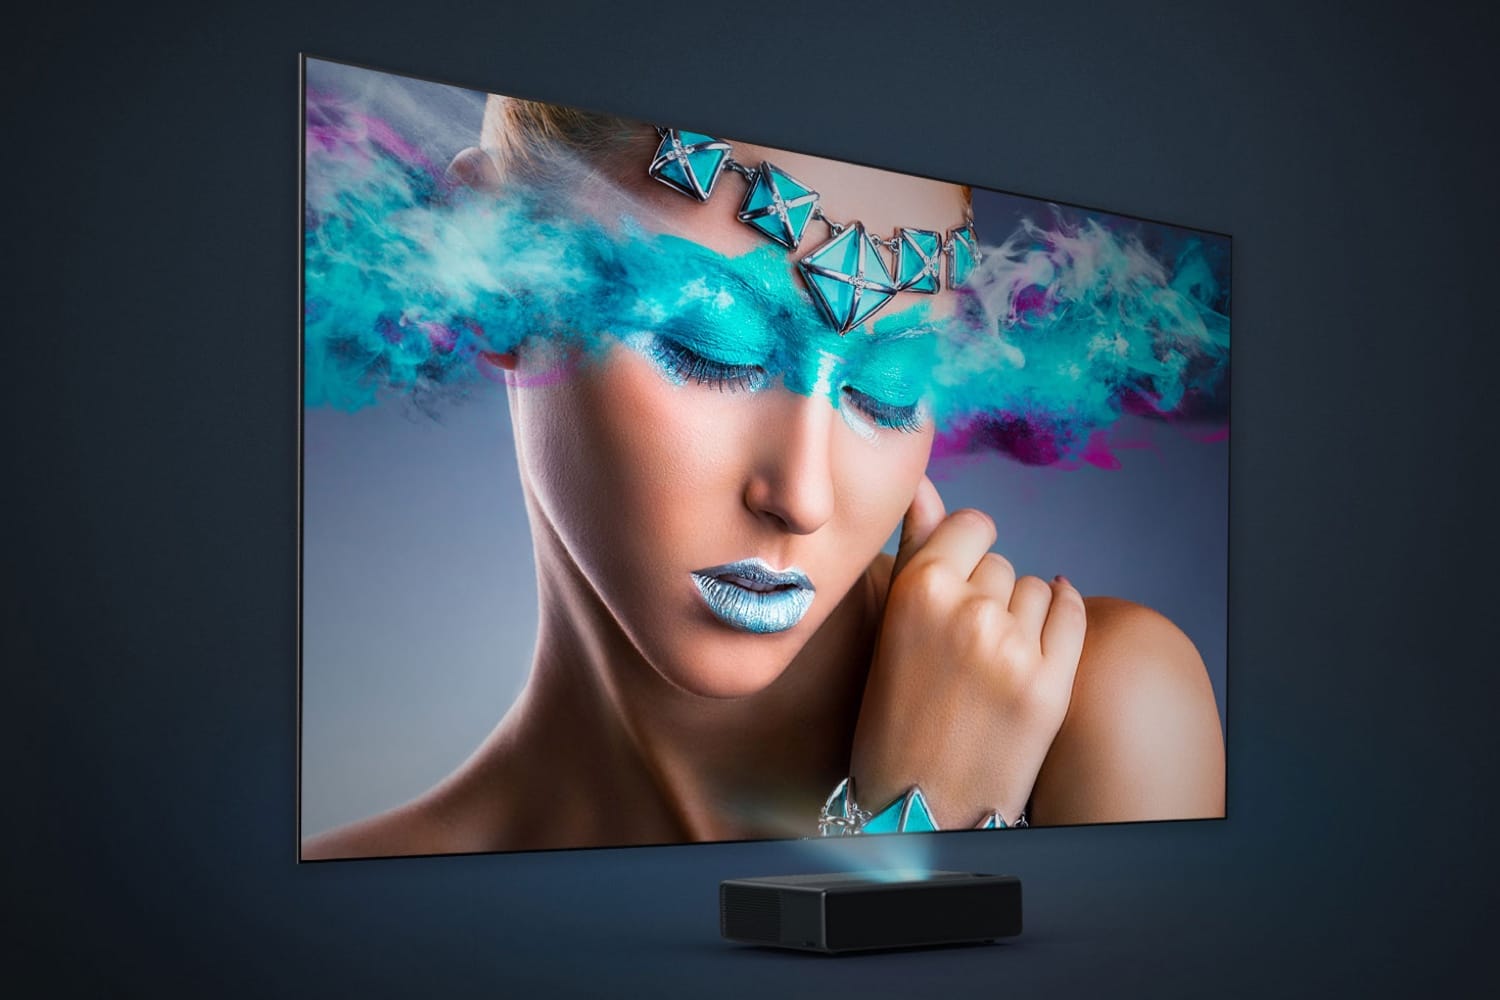 Xiaomi released a 100-inch TV with a laser projector for $ 1088